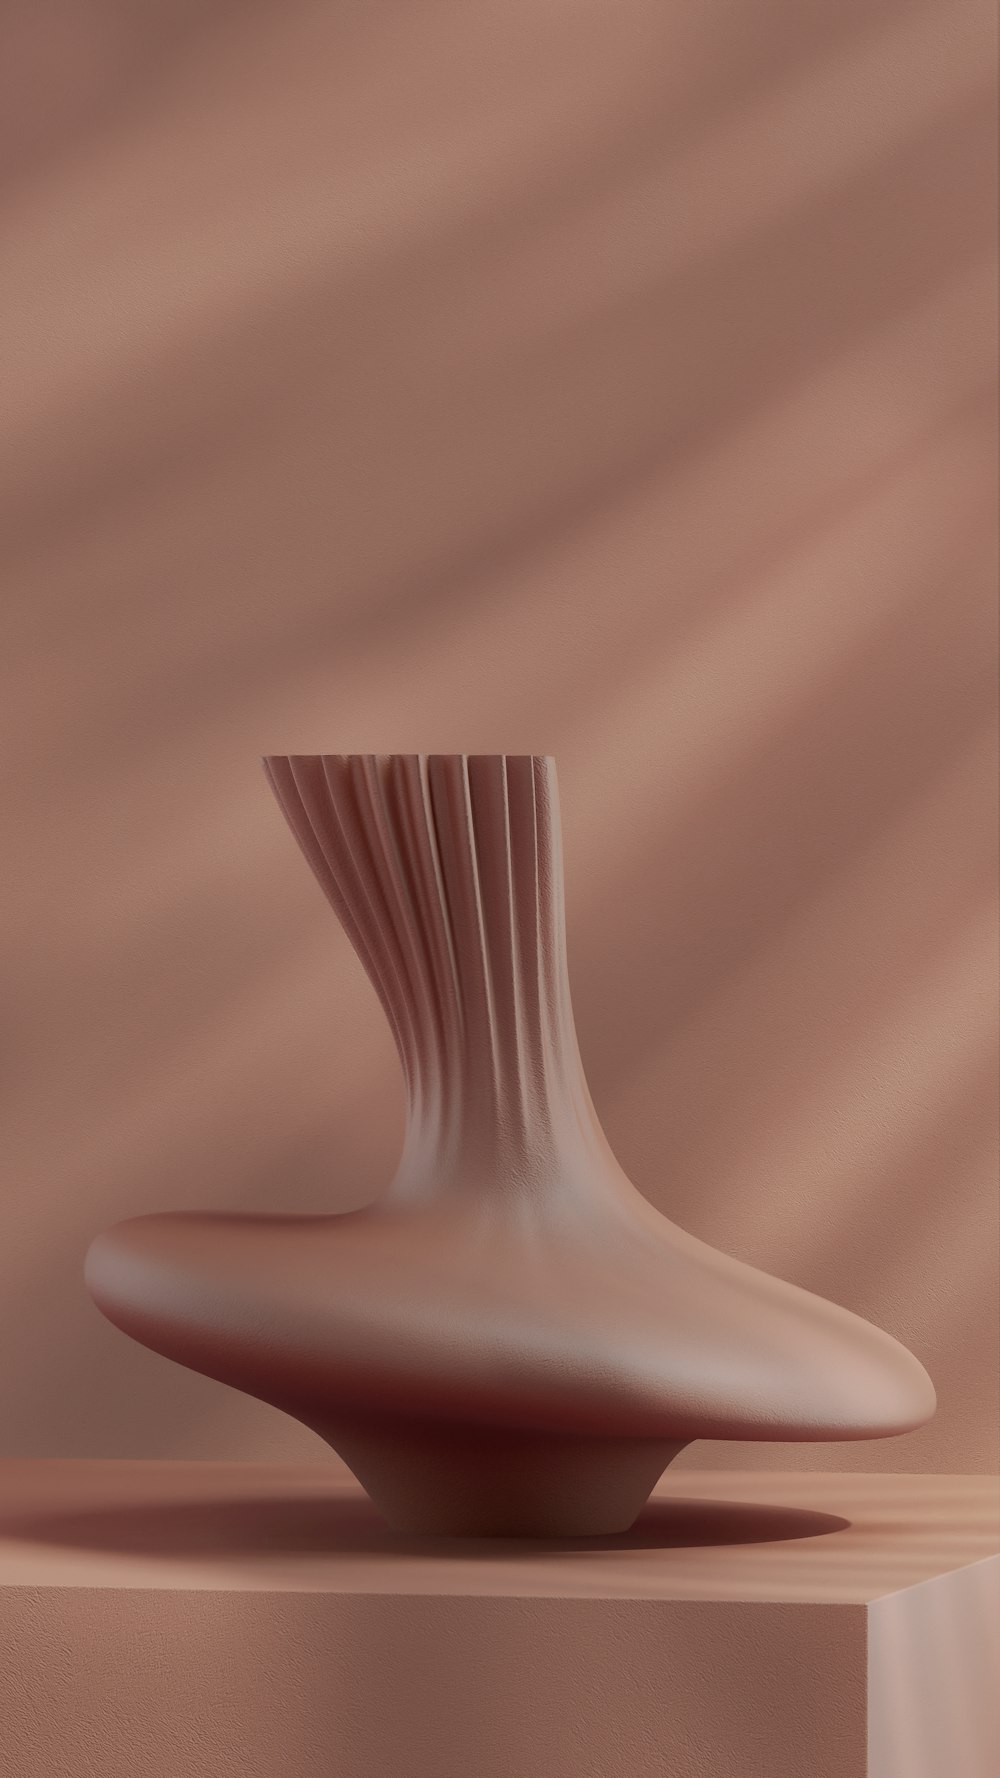 a white vase sitting on top of a wooden table